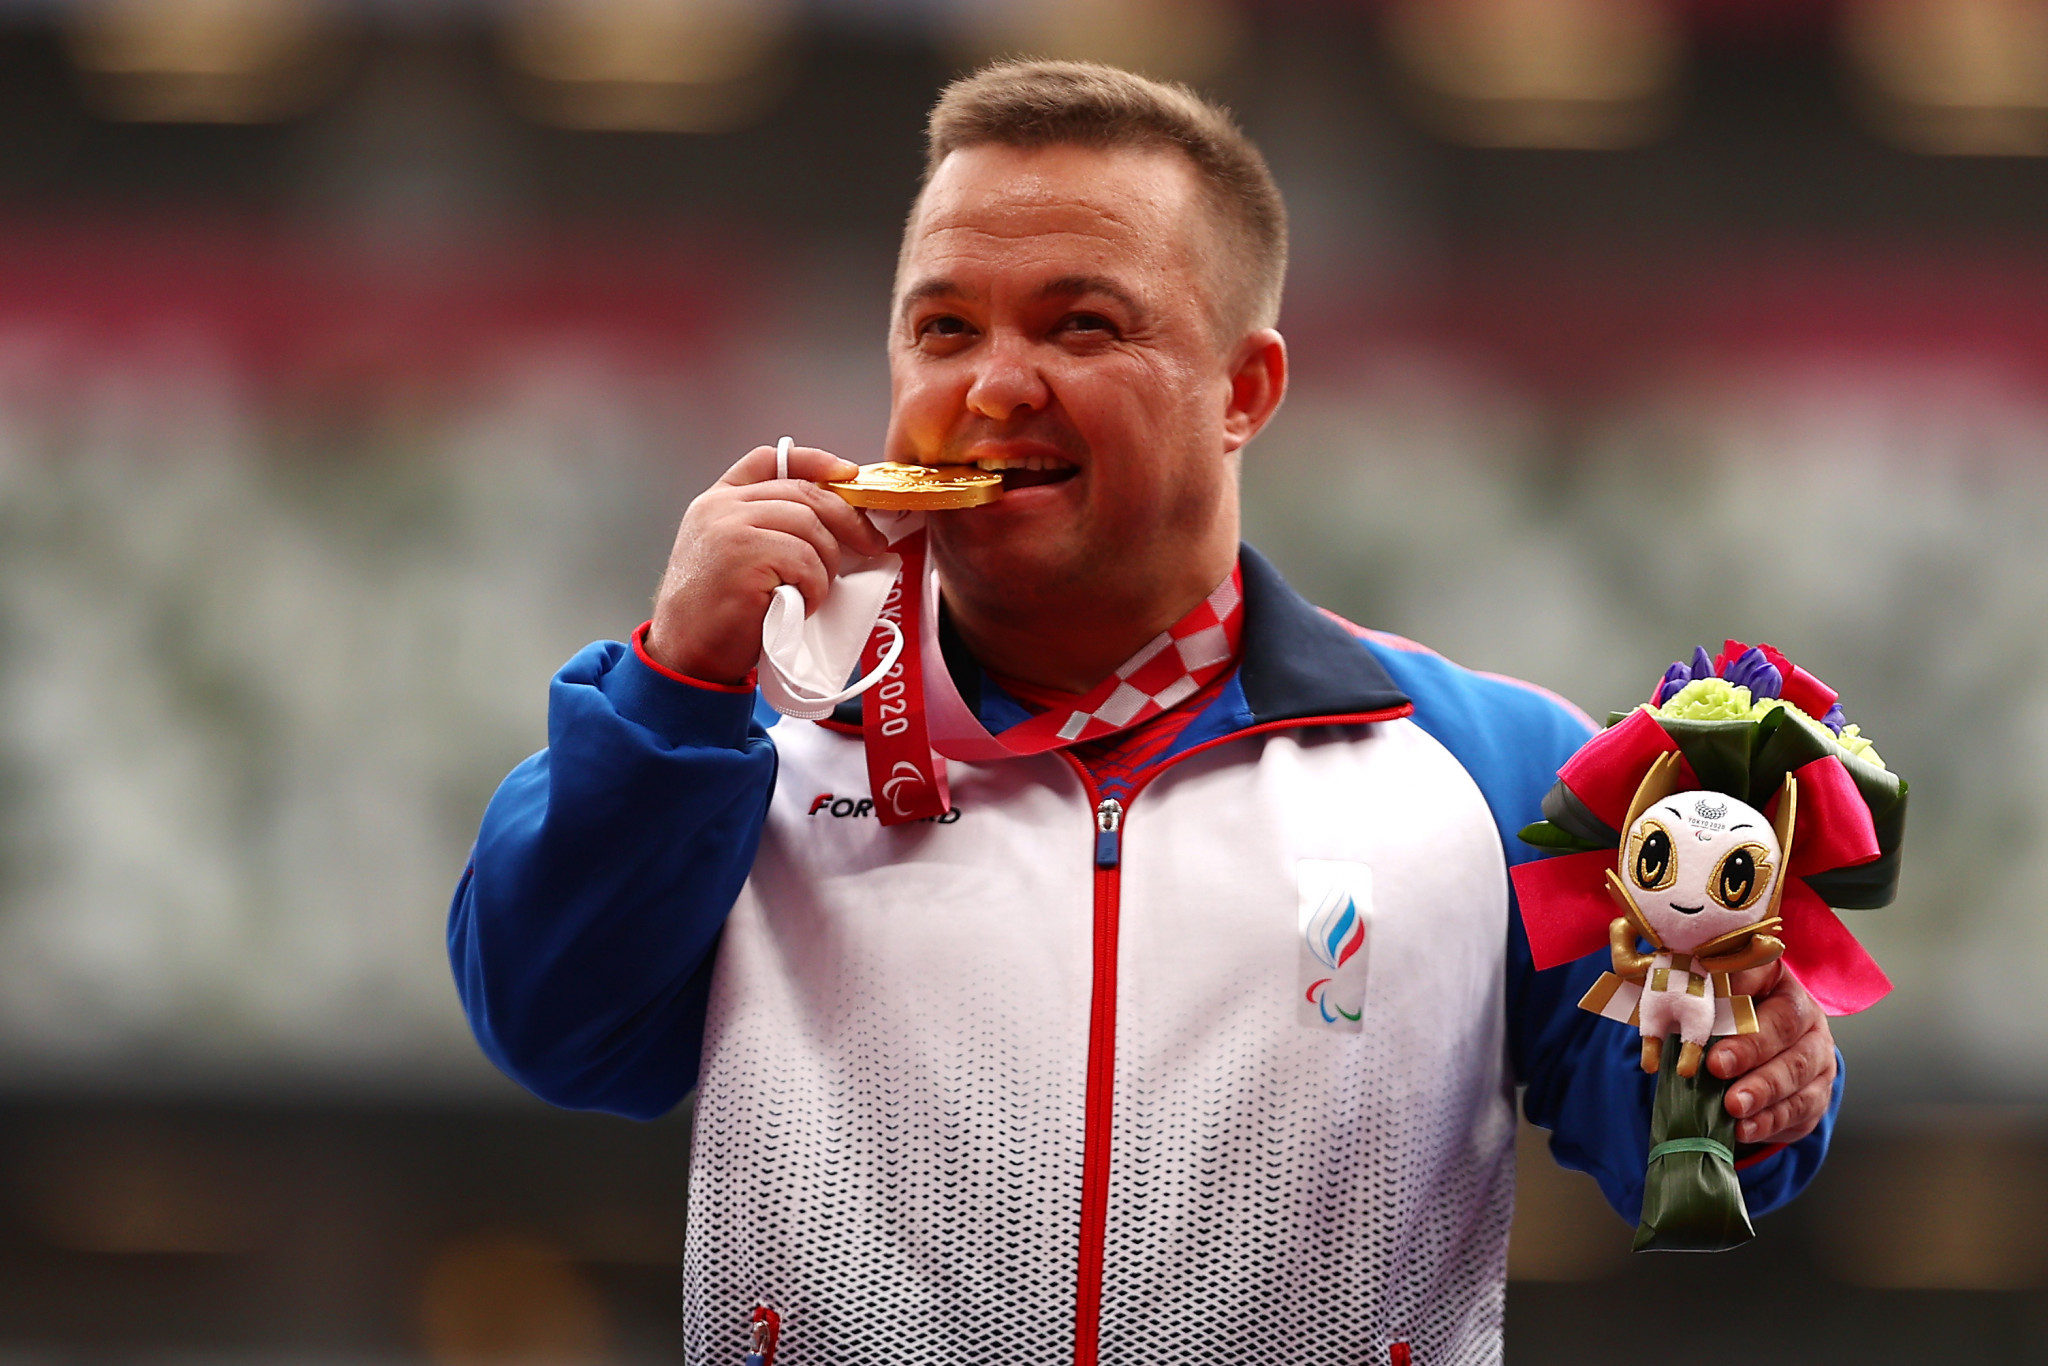 Denis Gnezdilov of the Russian Paralympic Committee saw Iraq's Garrah Tnaiash break the world record to steal gold away, only to go one centimetre further with his final throw in the F40 shot put final ©Getty Images